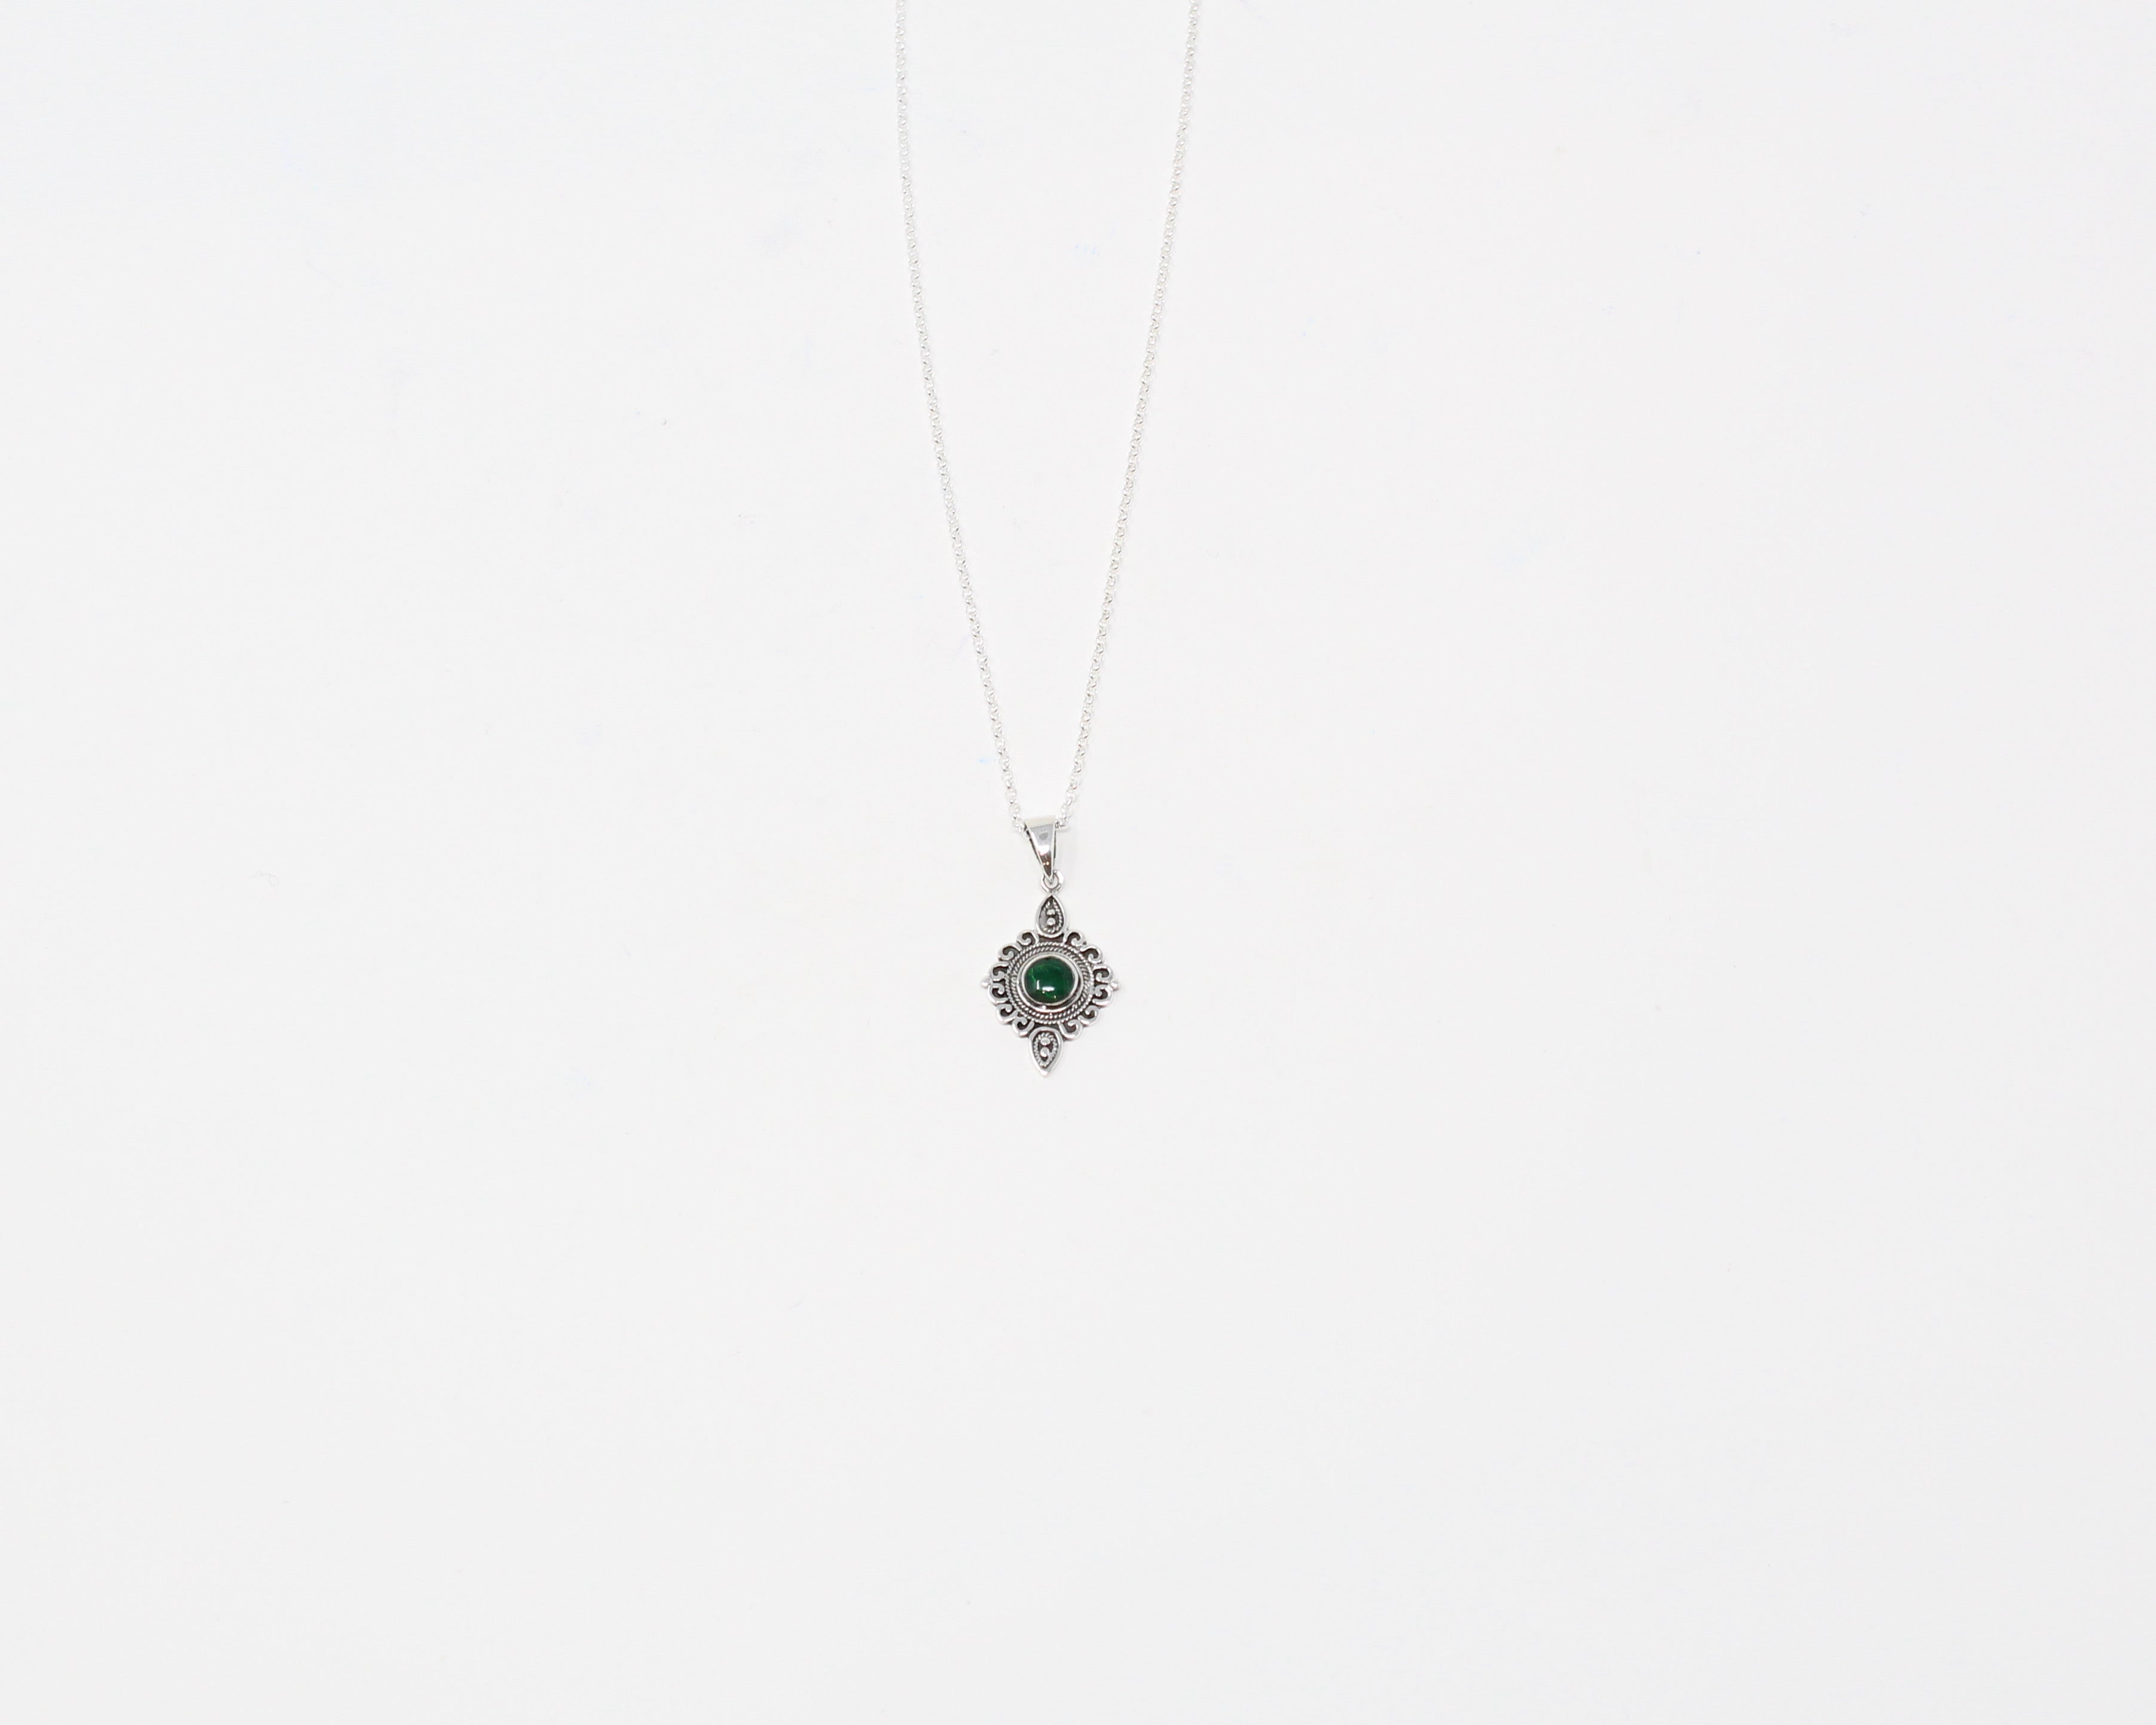 KRUNG, collier argent sterling.